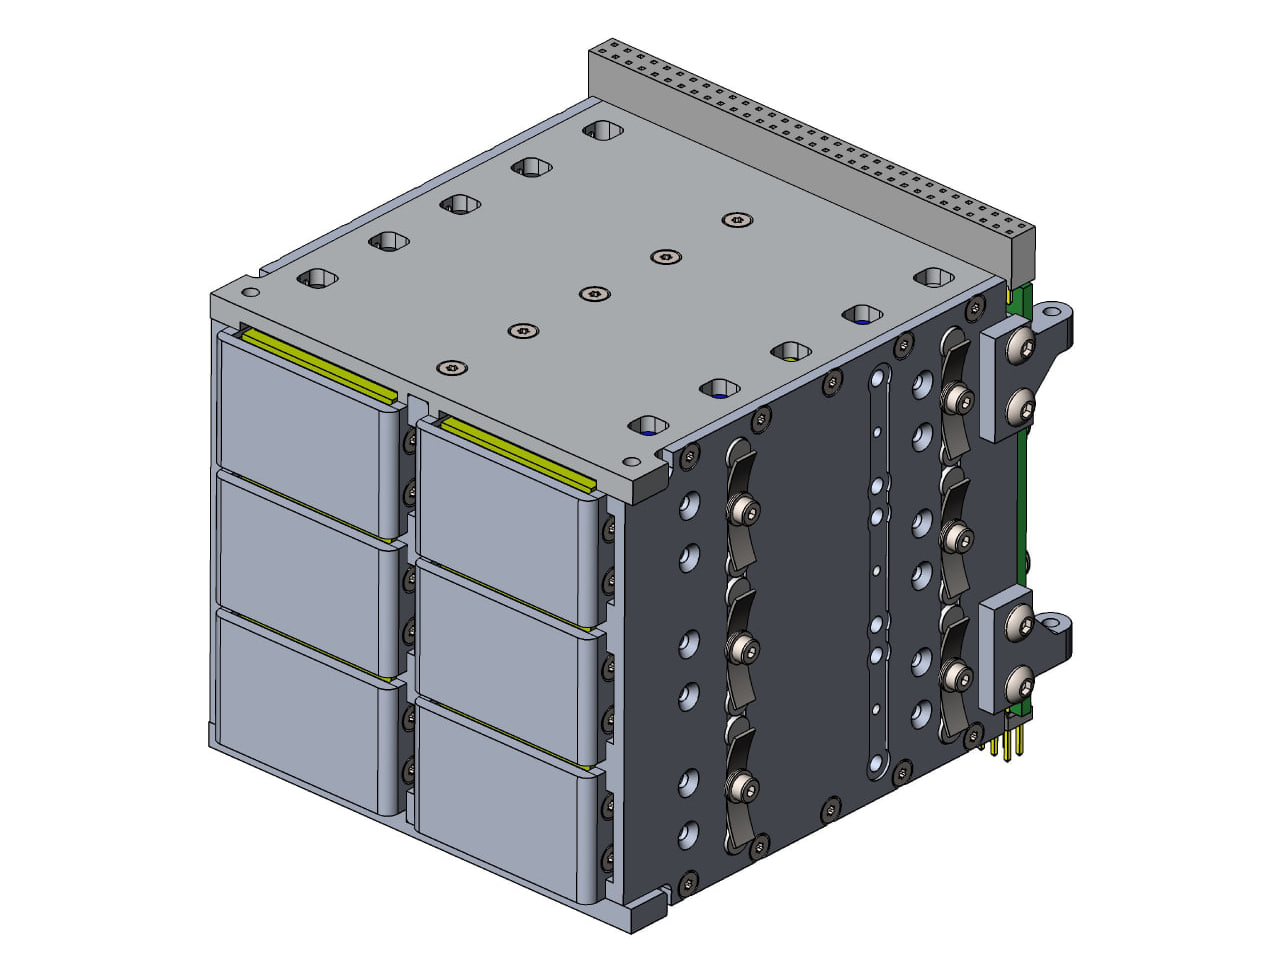 The Advanced Microsatellites Lab engineers developed a launch container for ultra-small femtosat satellites as part of a commercial project 